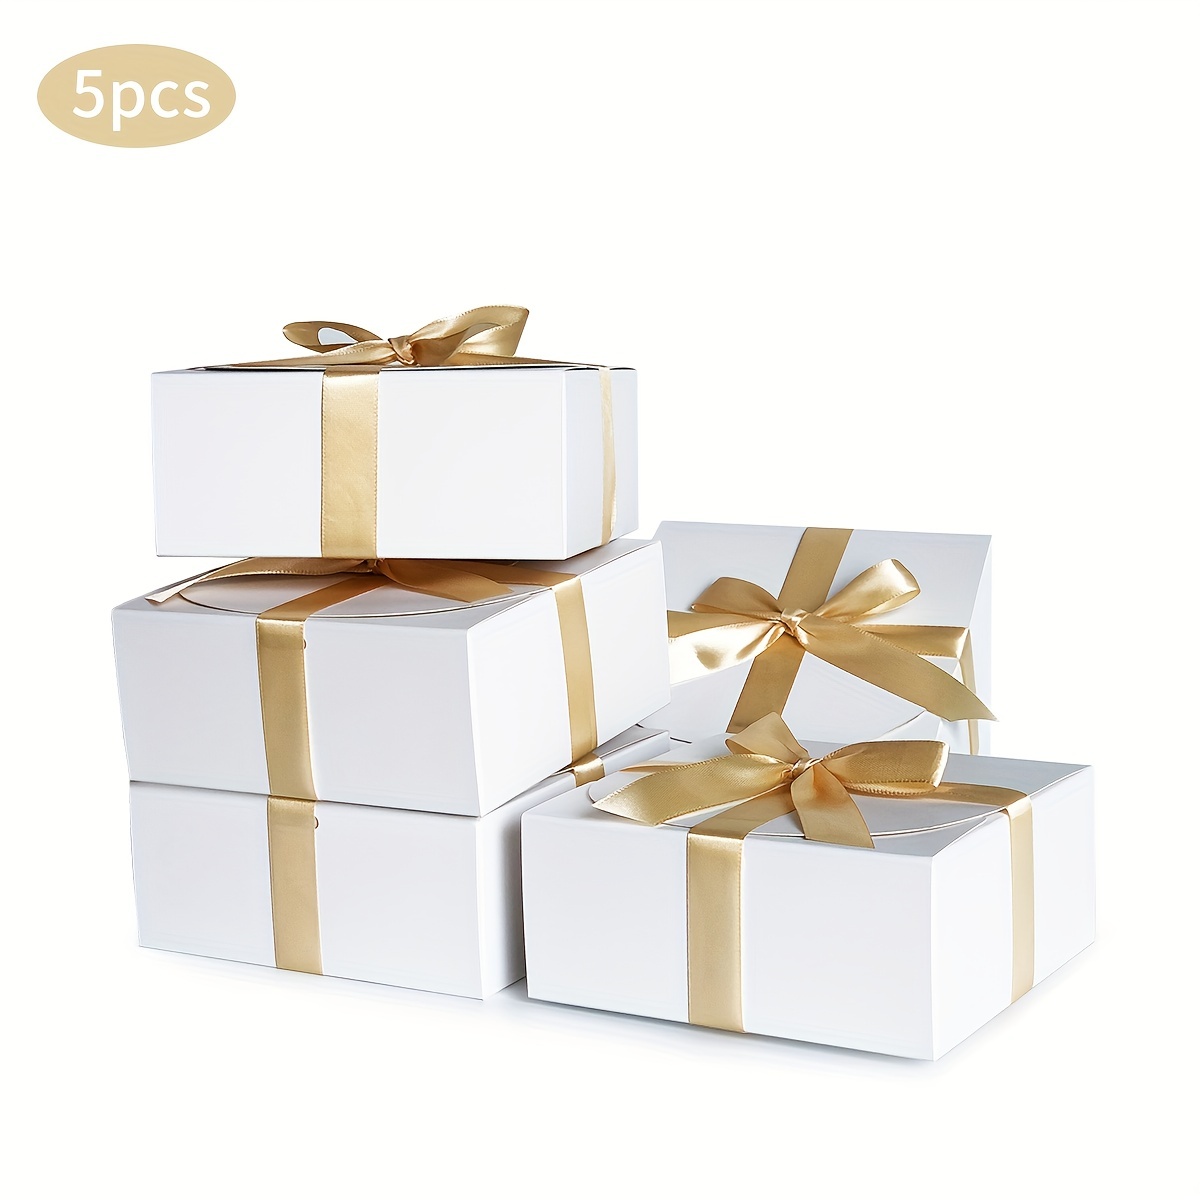 5Pcs Kraft Paper Gift Boxes with Clear Plastic Lid Cover Presents